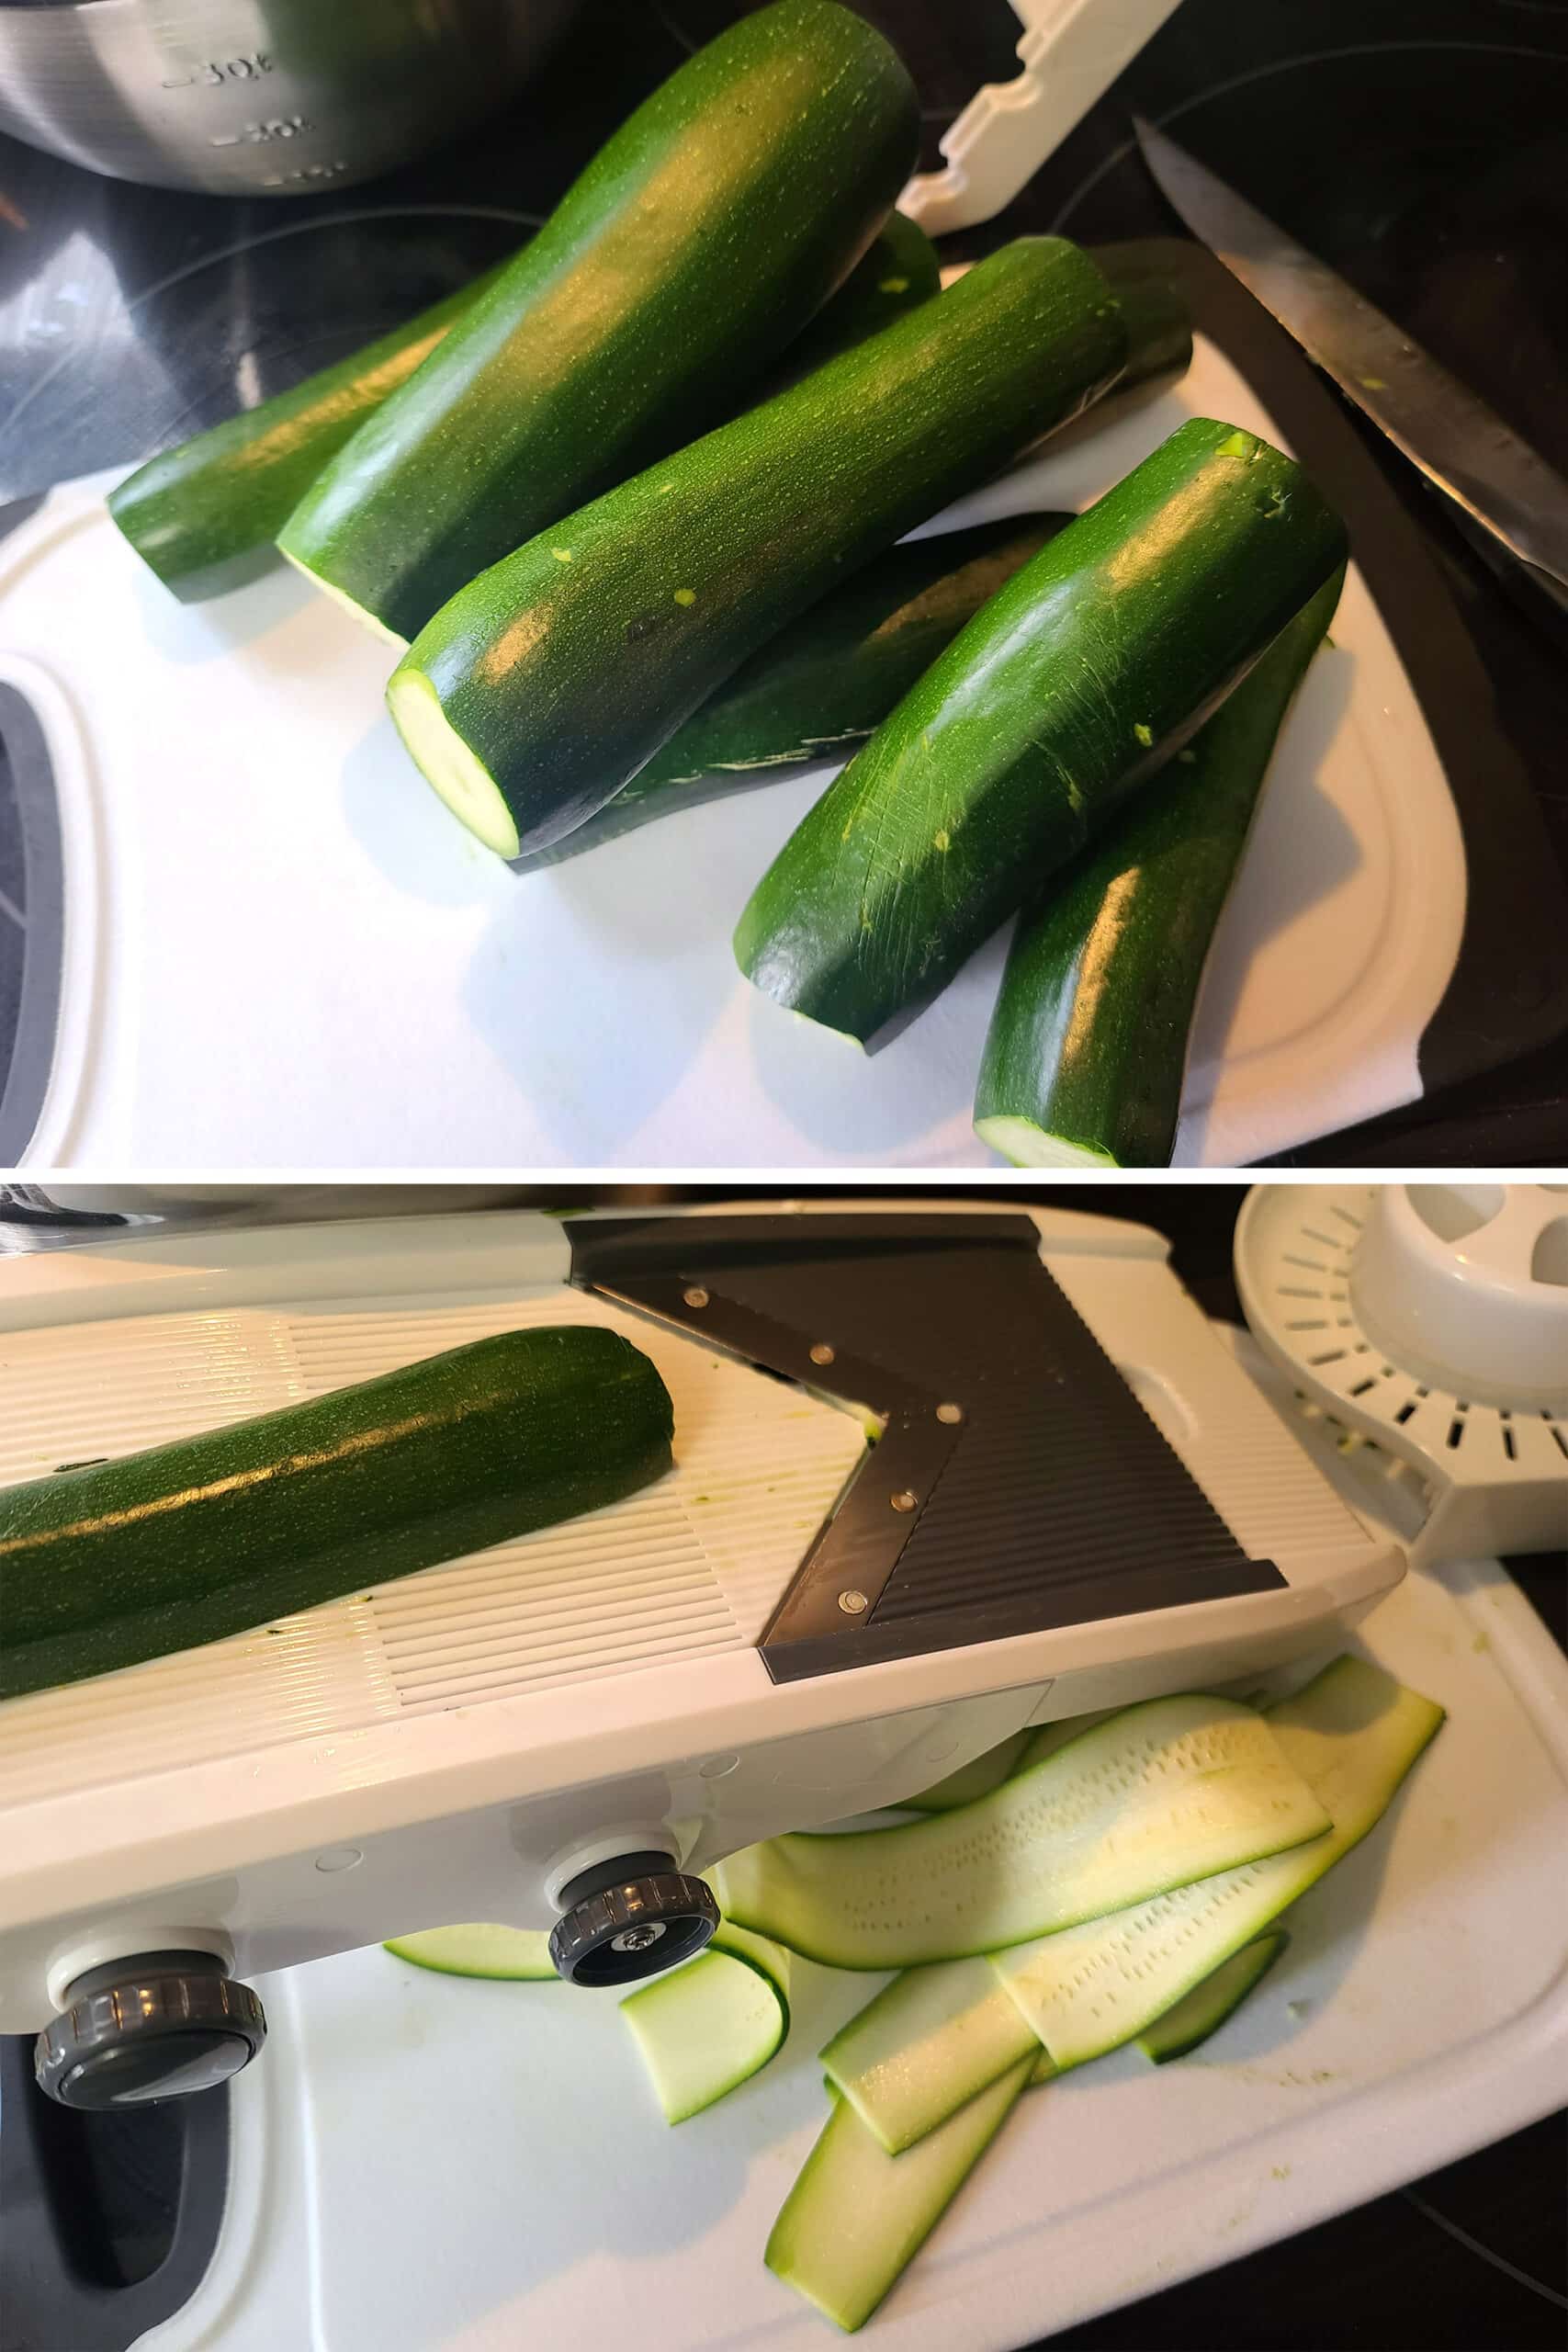 A 2 part image showing zucchinis being trimmed and thinly sliced on a mandoline.